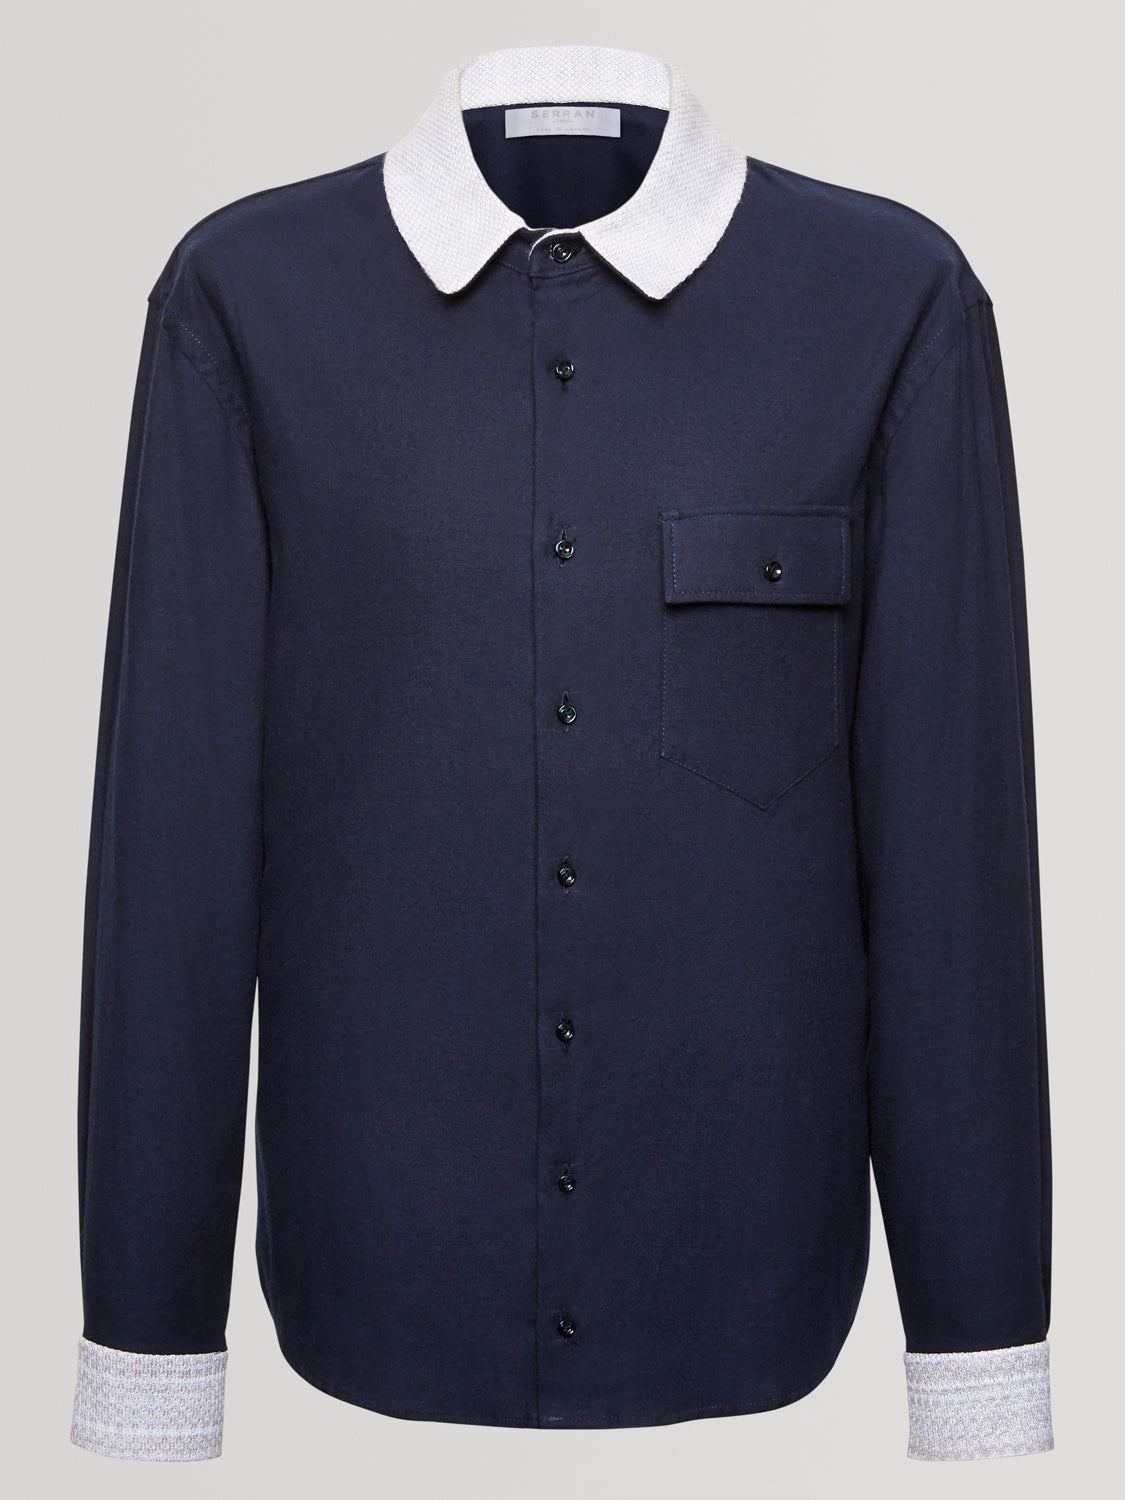 Oyster White Knit Collar Navy Slim Fit Shirt